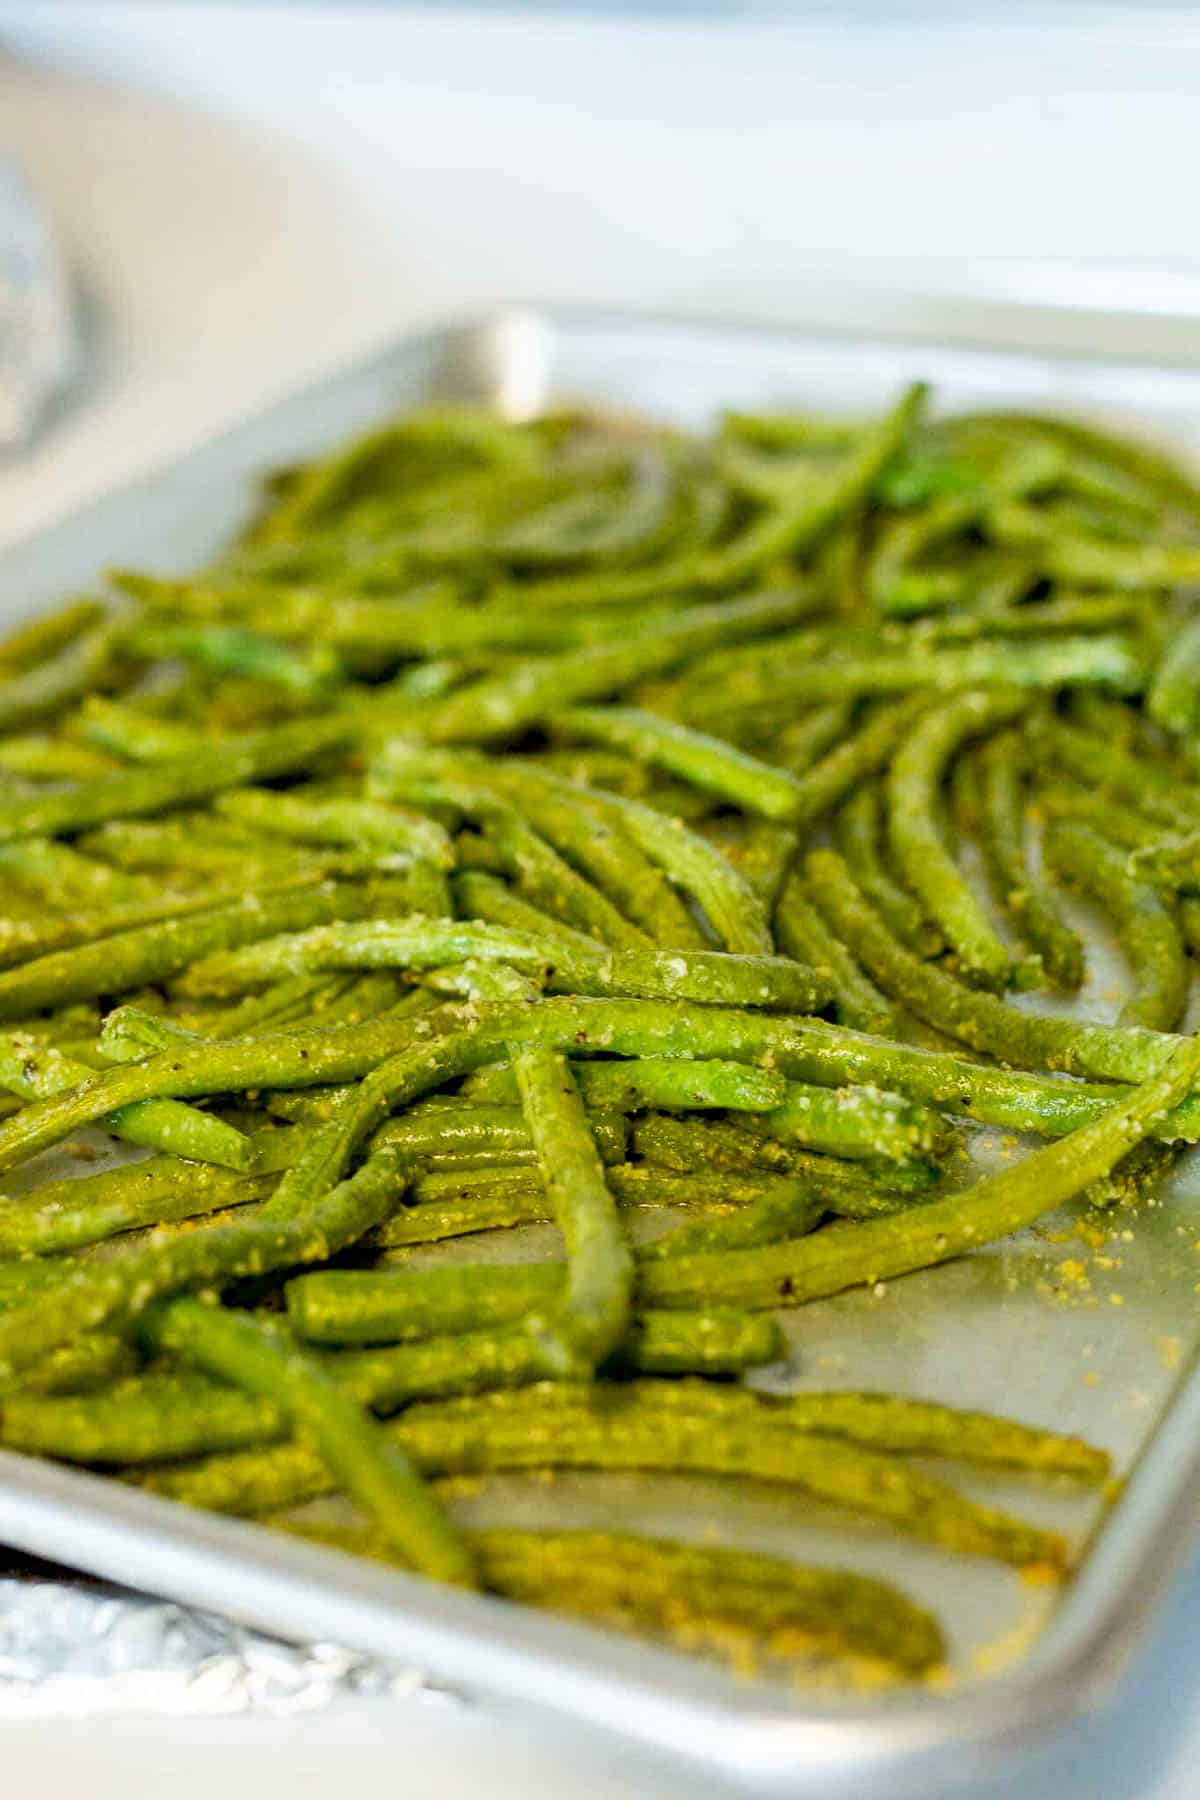 Roasted parmesan green beans right out of the oven on a silver baking sheet.